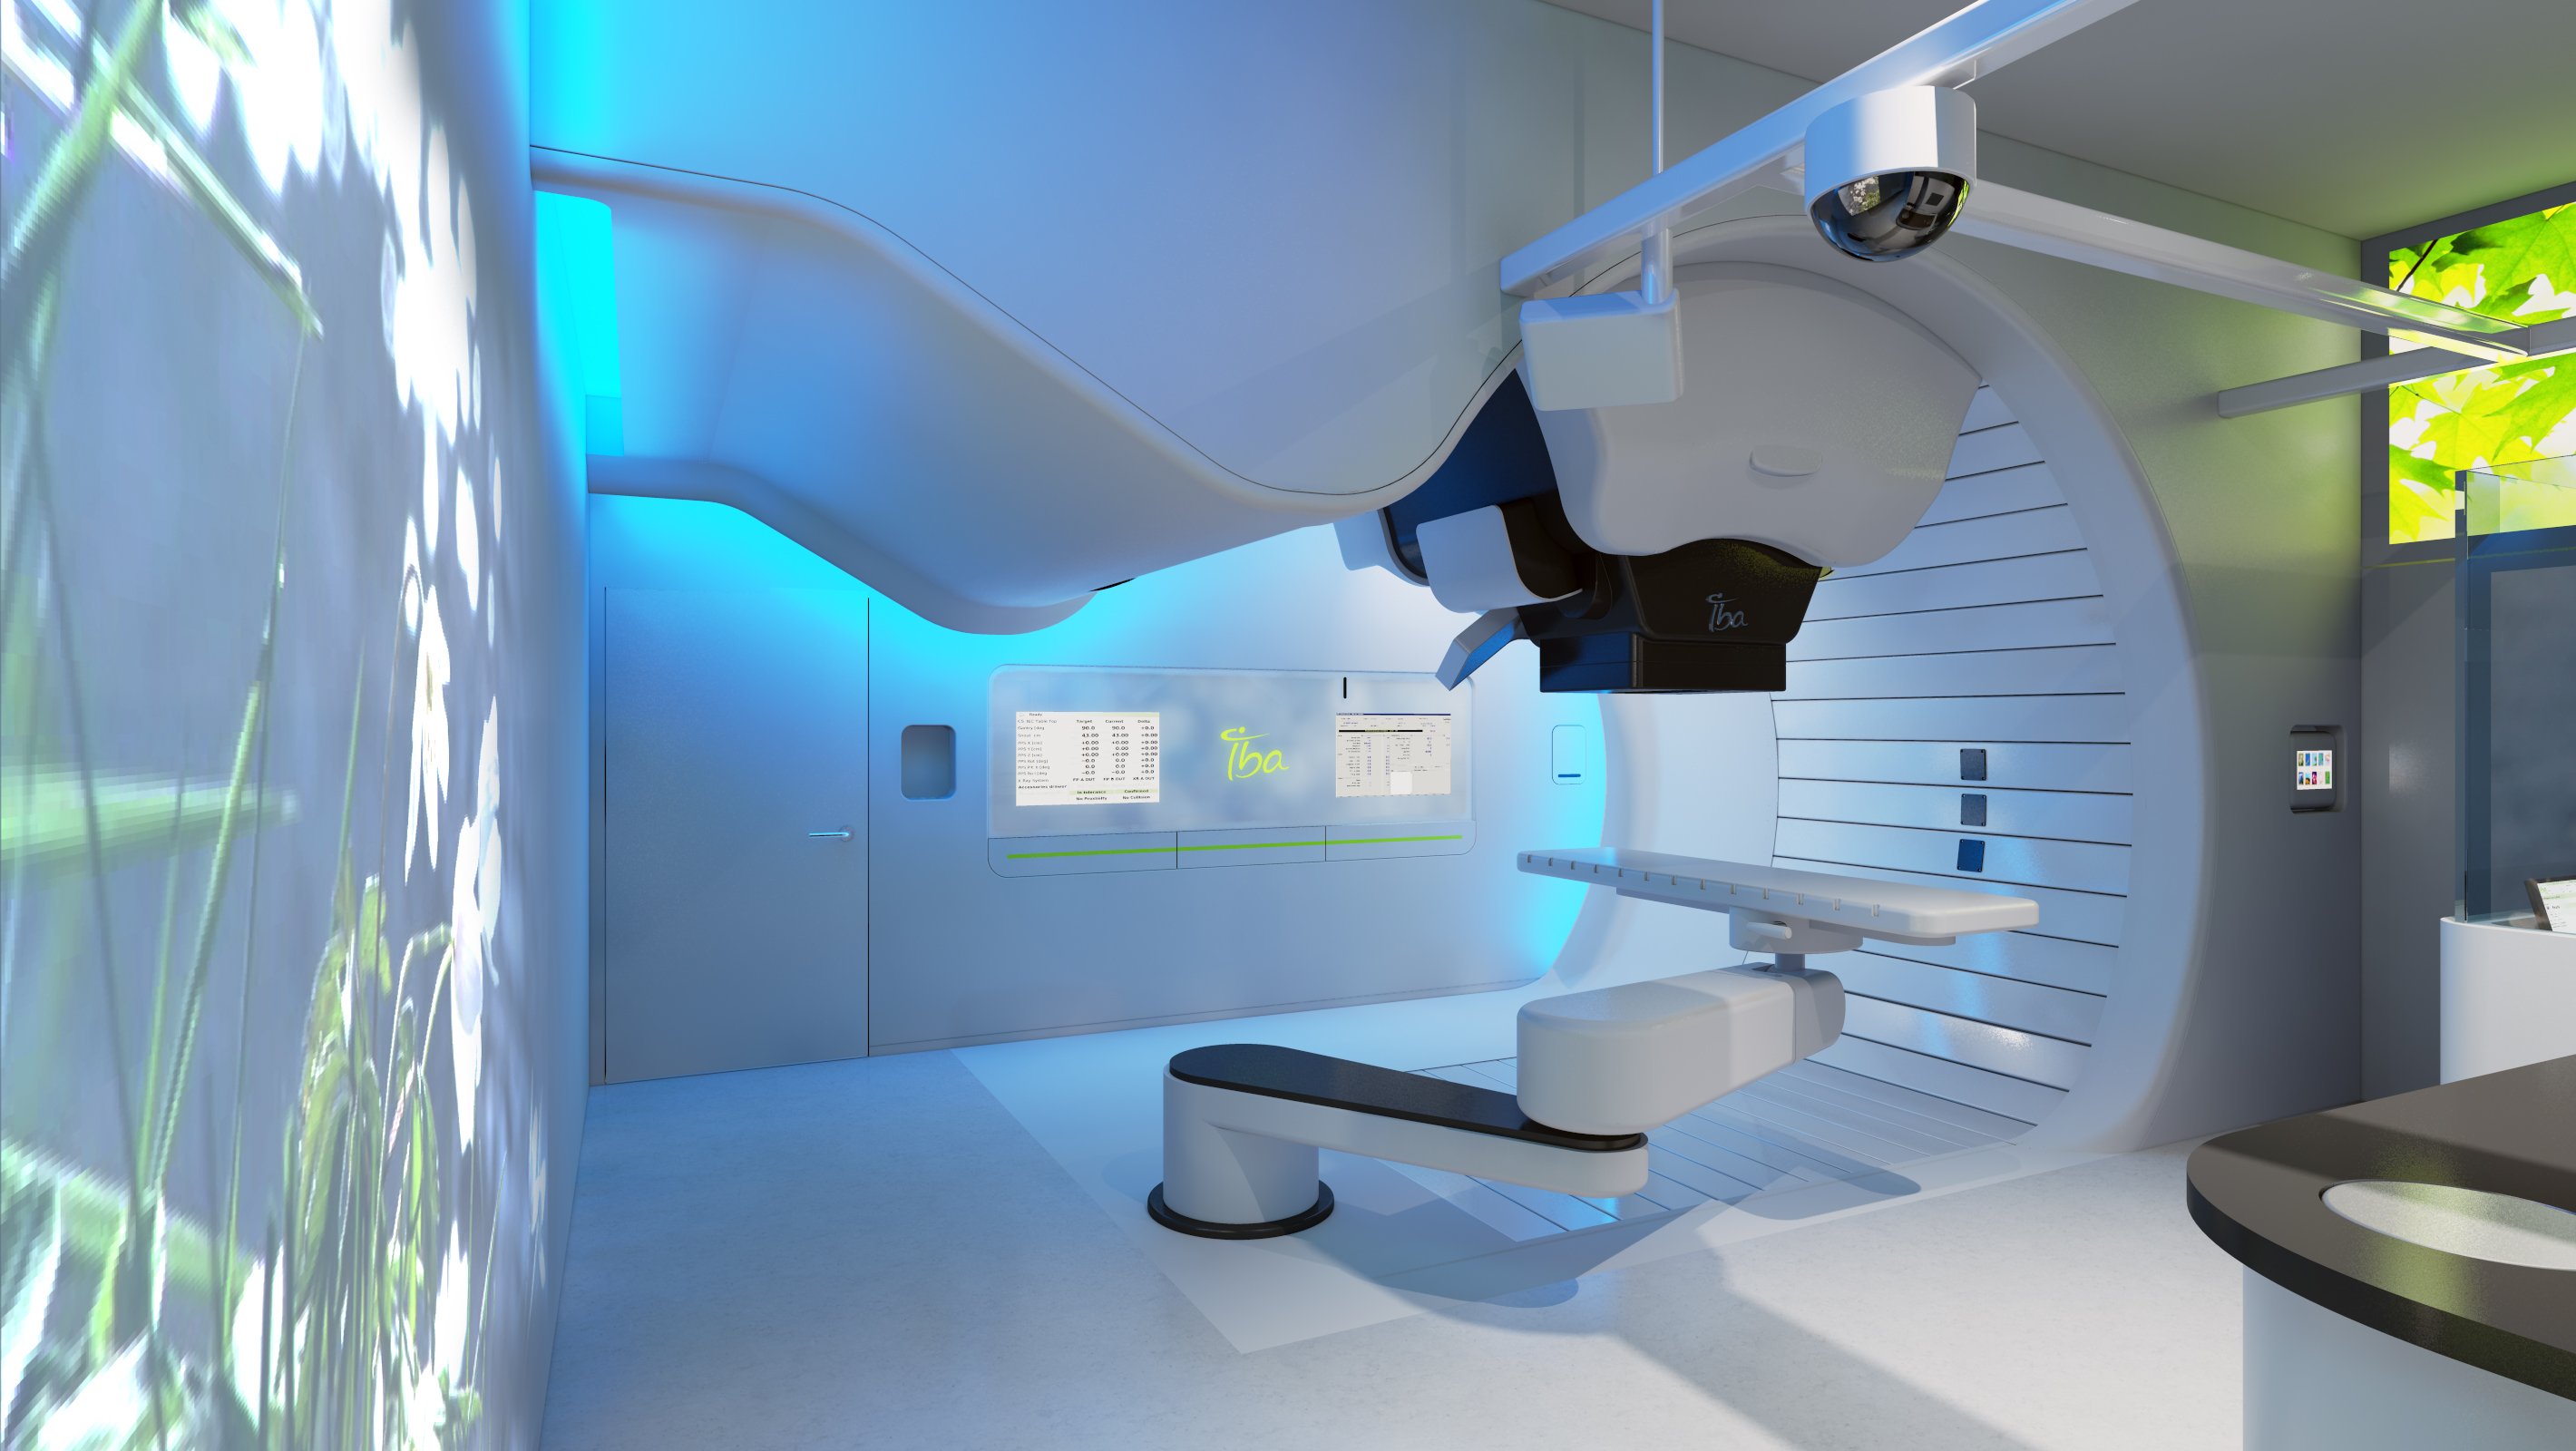 External Beam Radiation Therapy for Cancer - NCI